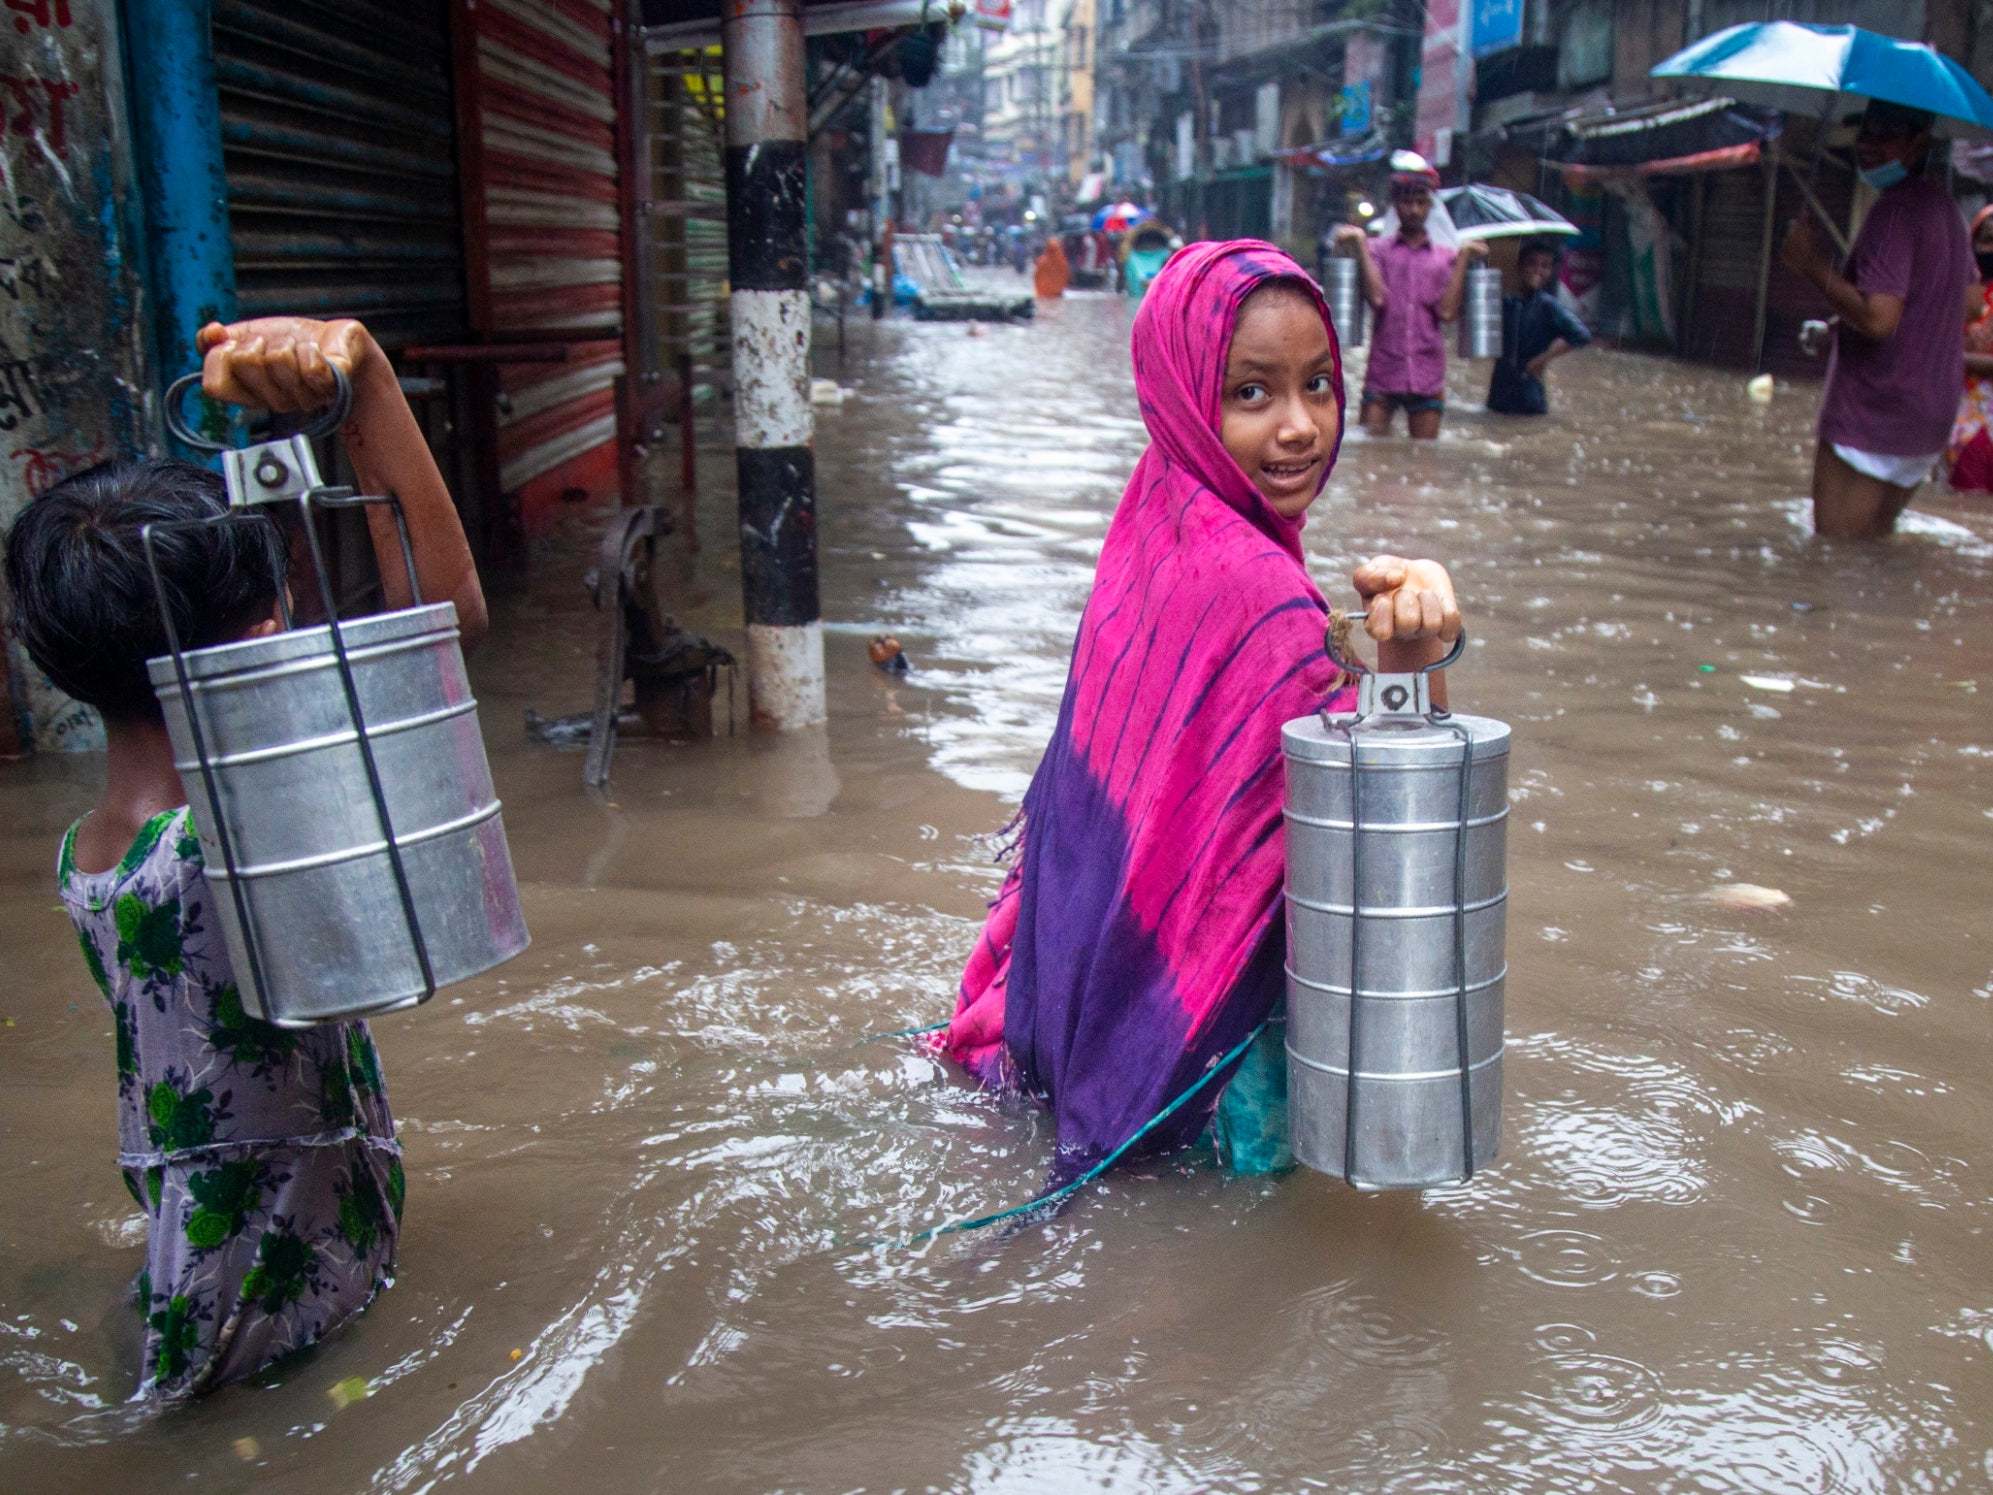 Children carrying tiffin boxes through a flooded street in Dhaka, Bangladesh last week